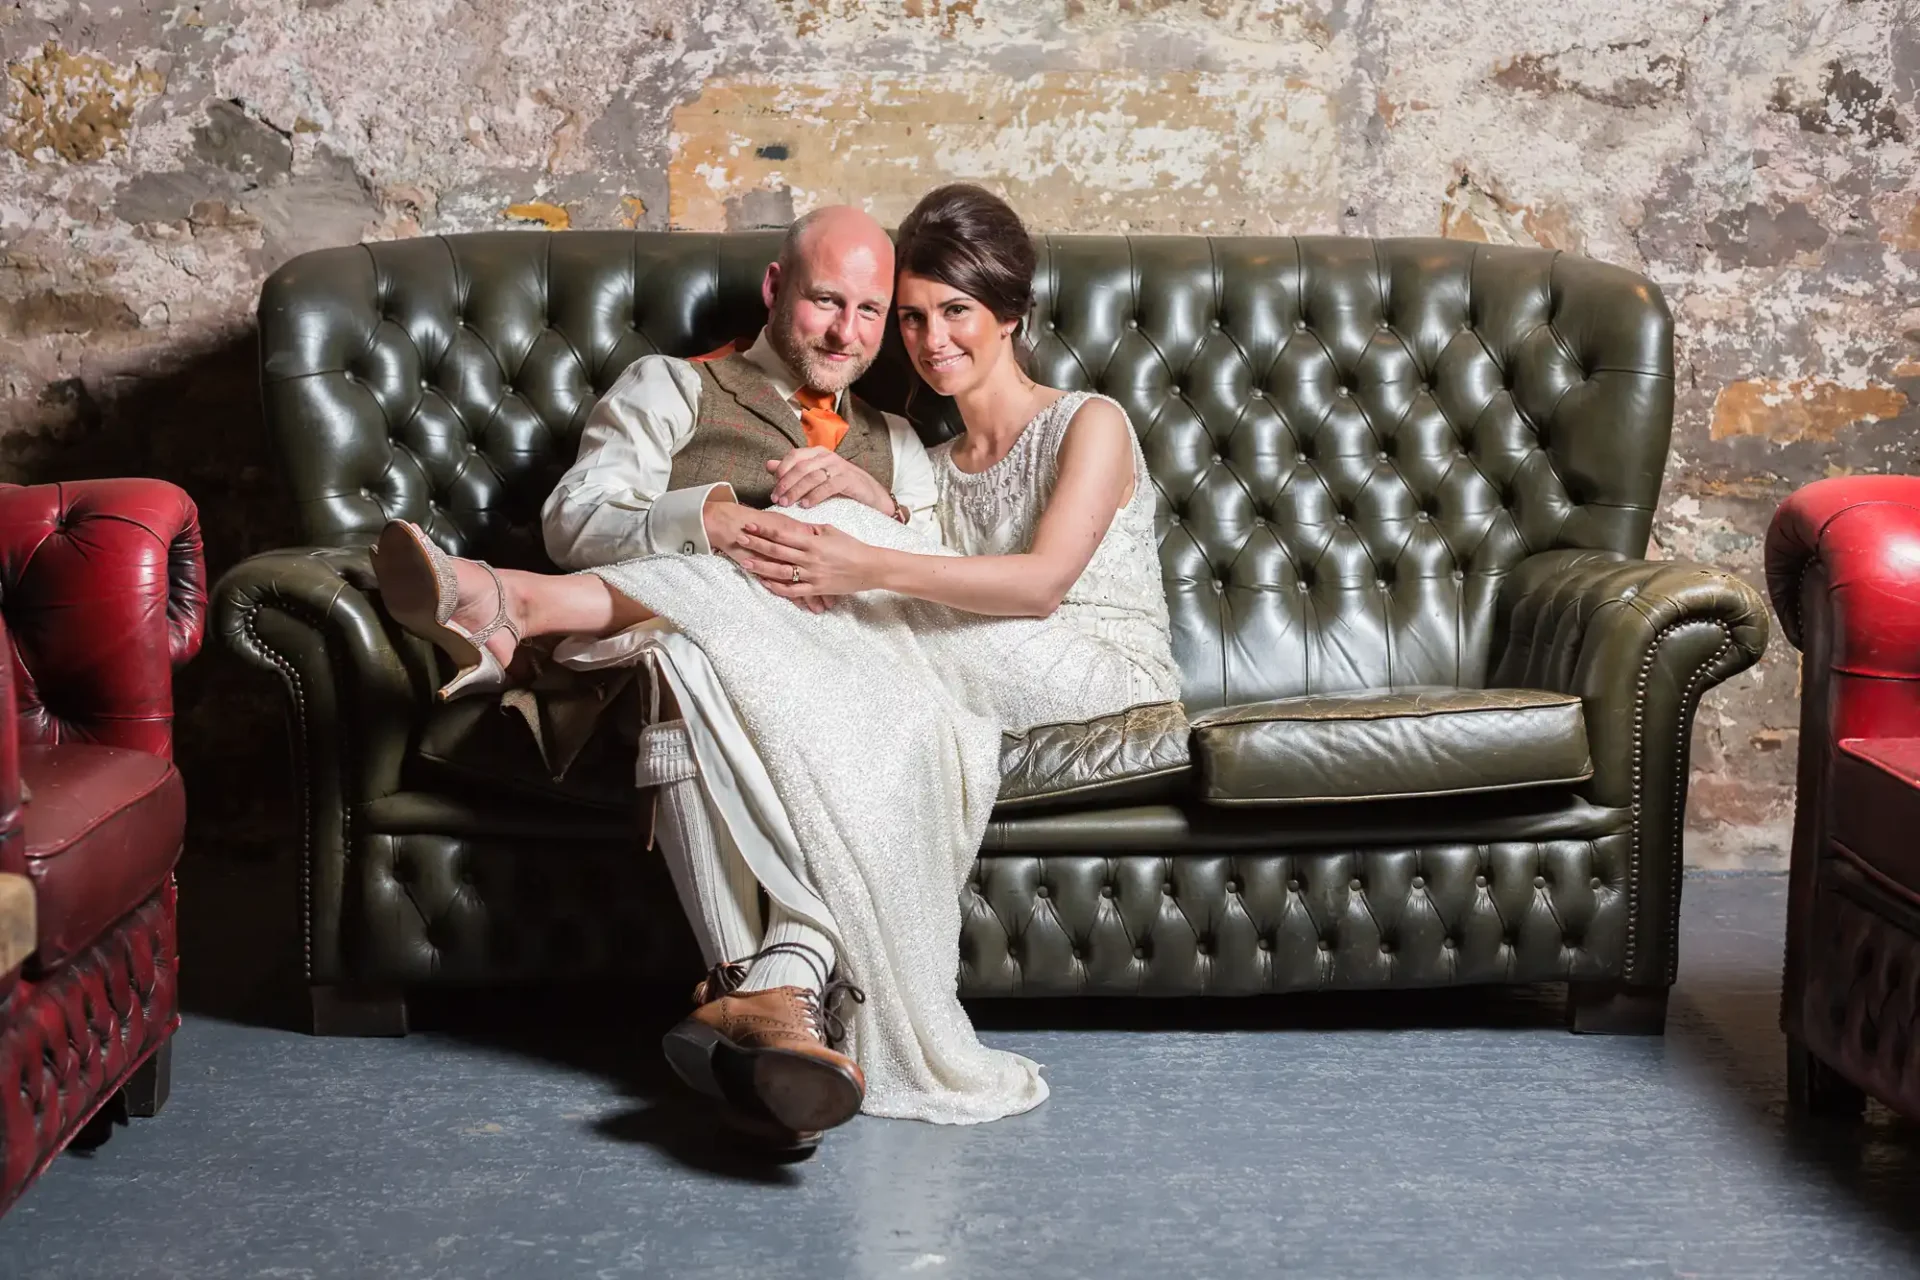 A couple in formal attire sitting closely on a leather sofa, smiling, in a room with rustic walls.